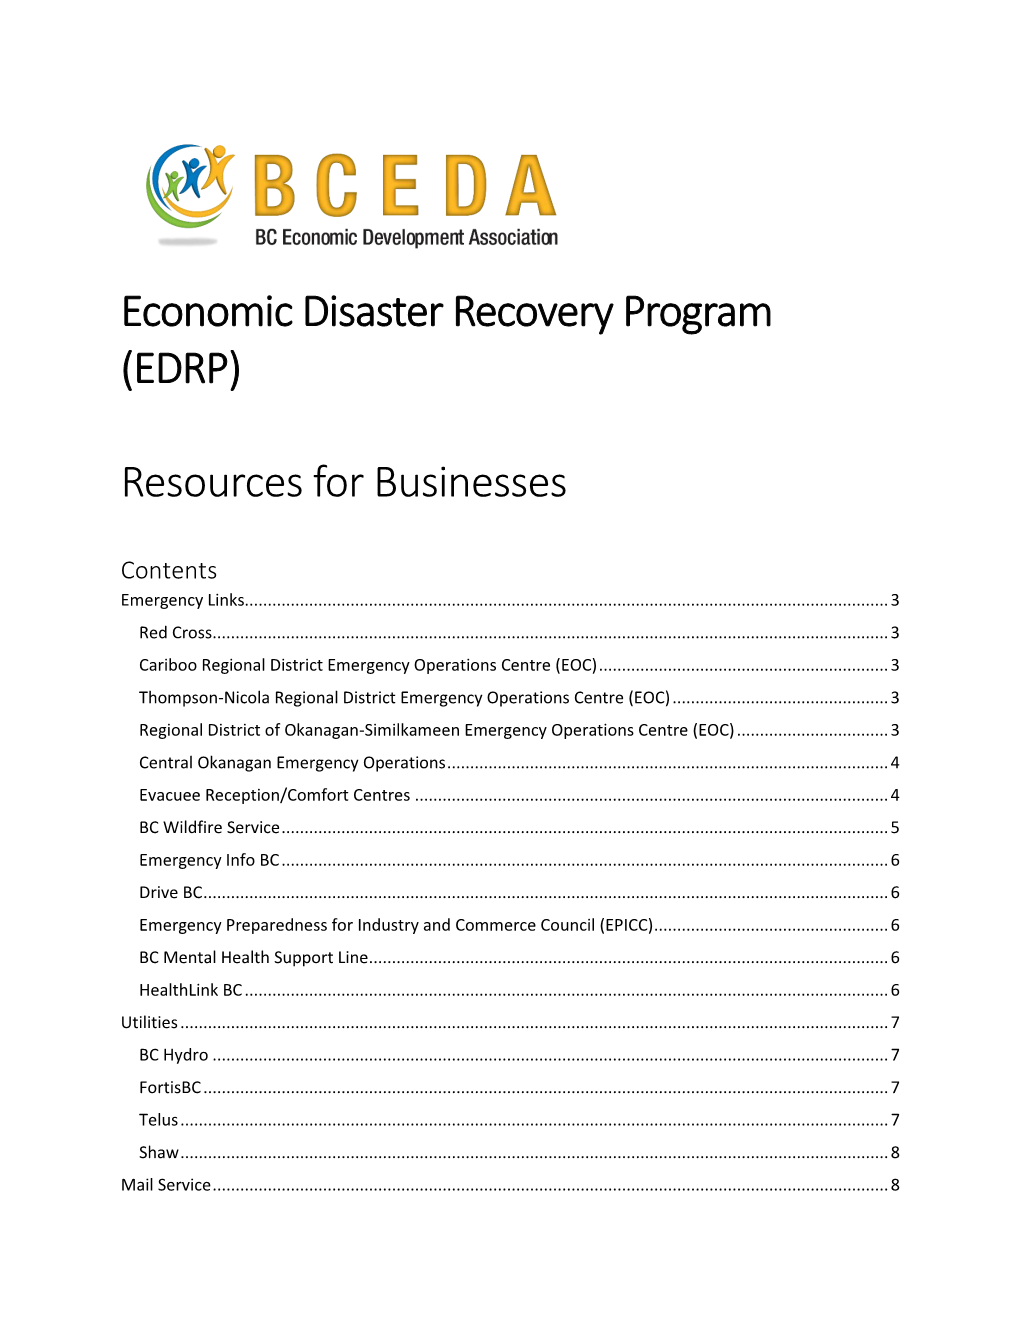 Economic Disaster Recovery Program (EDRP) Resources for Businesses